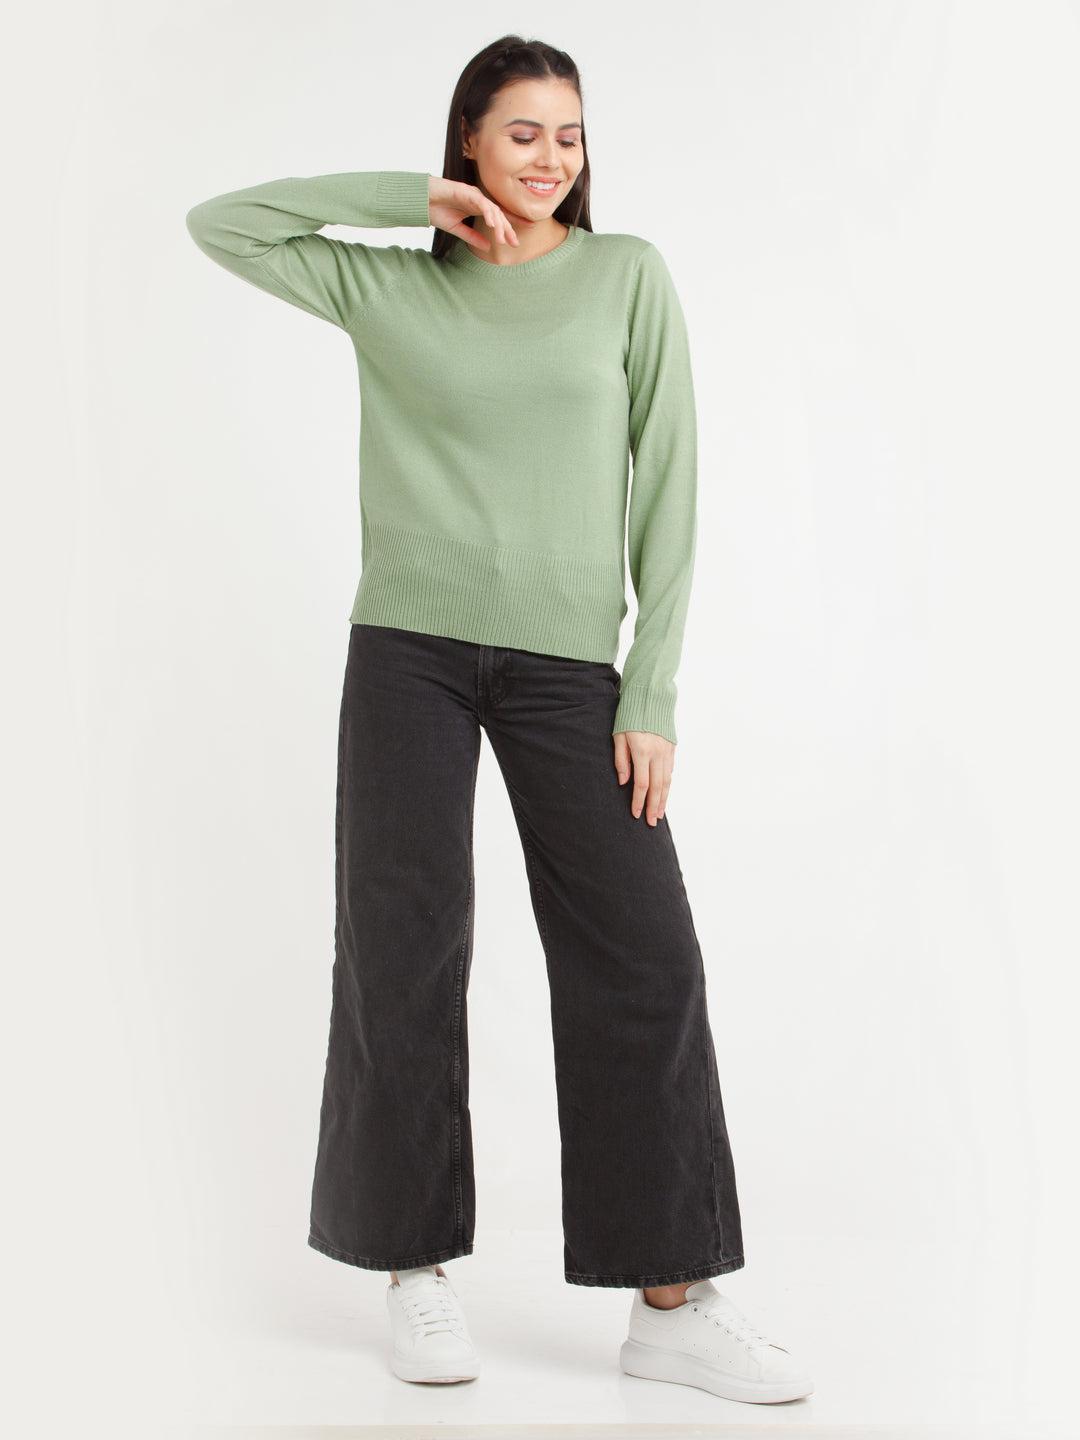 green-solid-sweater-for-women